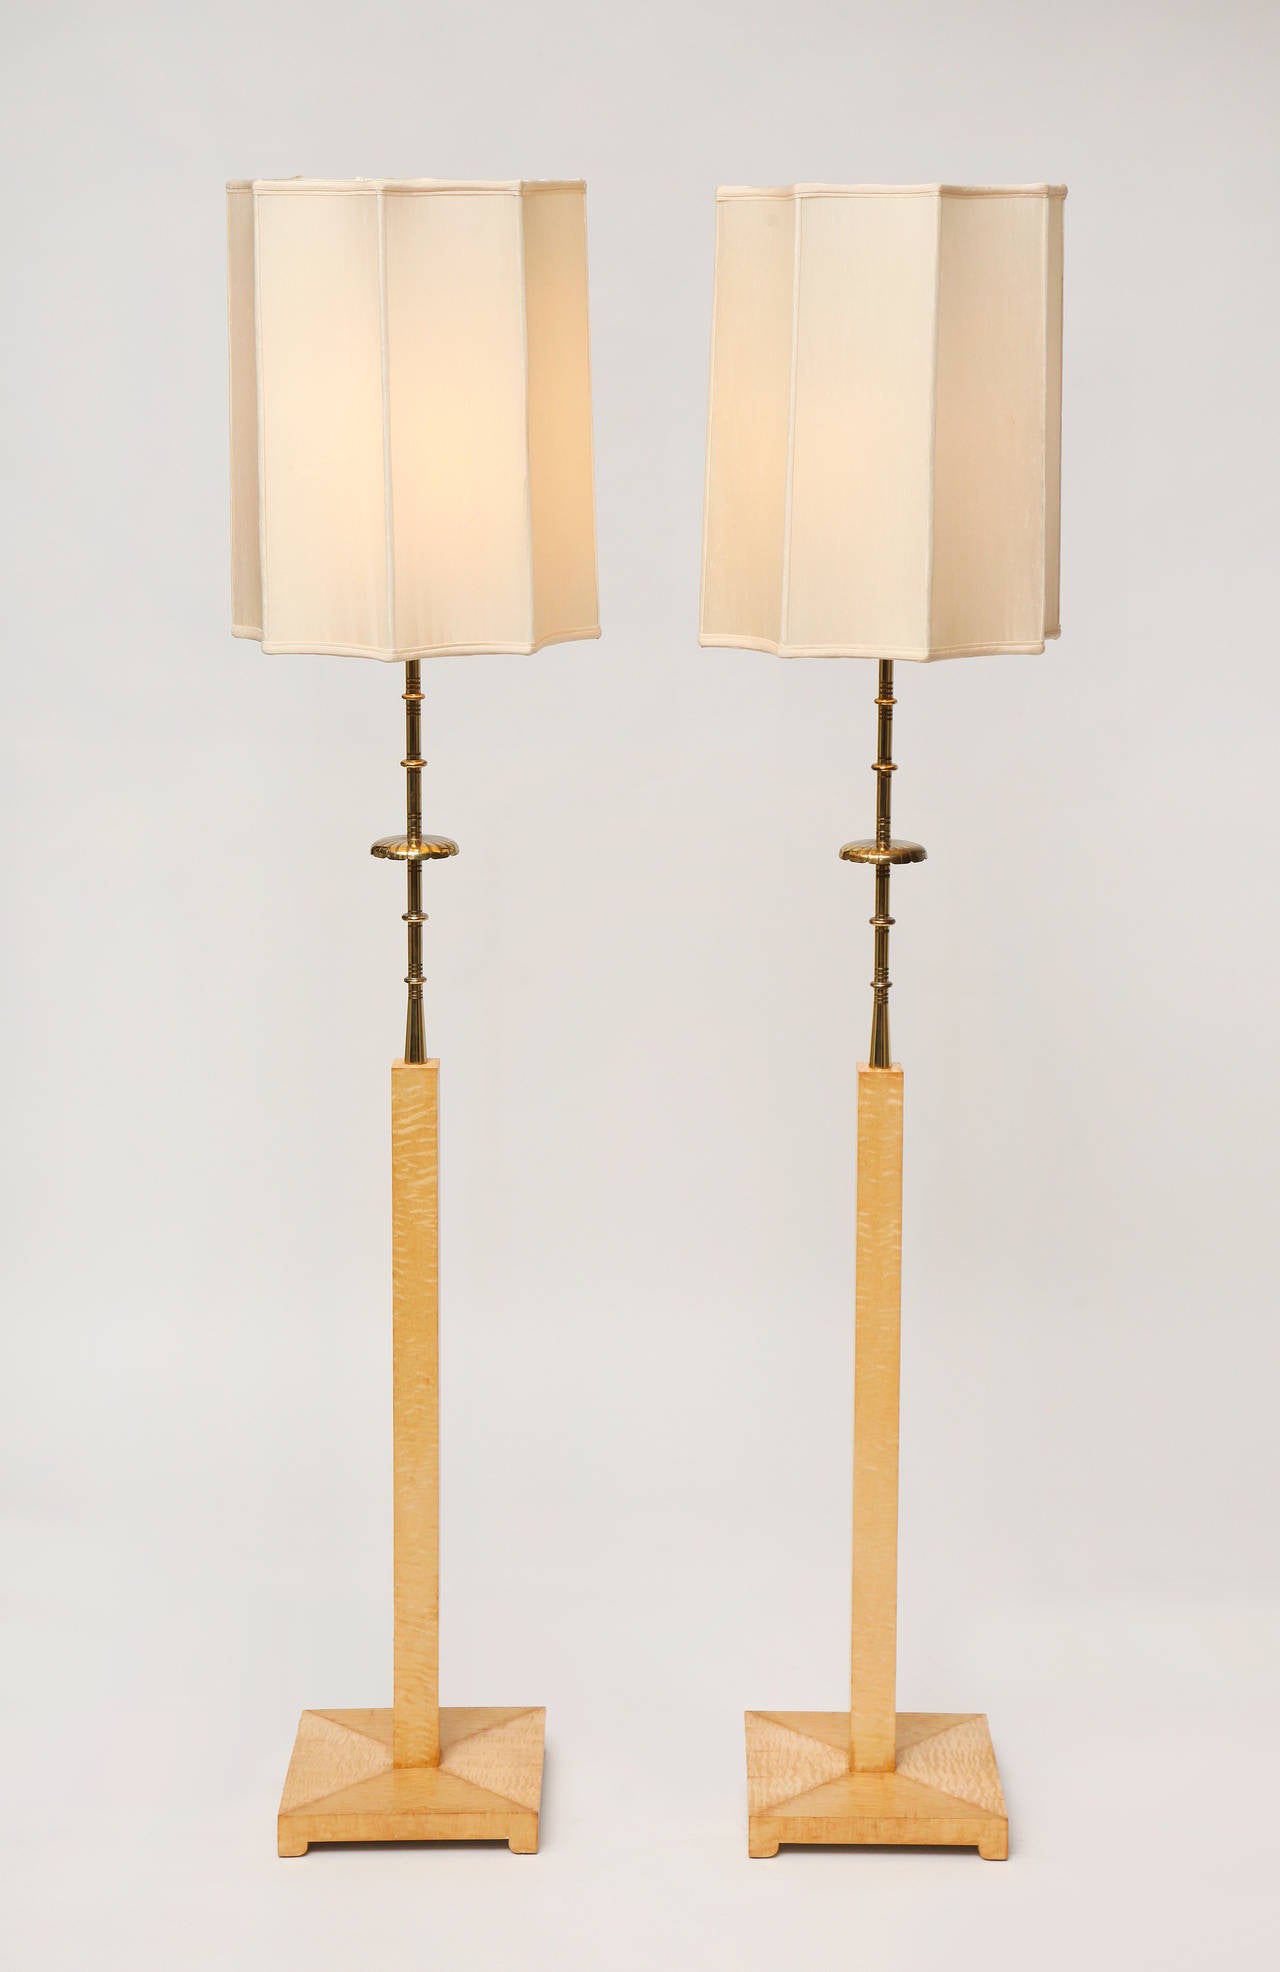 Curly maple and brass floor lamp by Tommi Parzinger, with original silk shade.

This floor lamp was custom designed for the Appleman Commission.

This perfectly proportioned floor lamp in curly maple, brass, and silk, from the famous mid-century